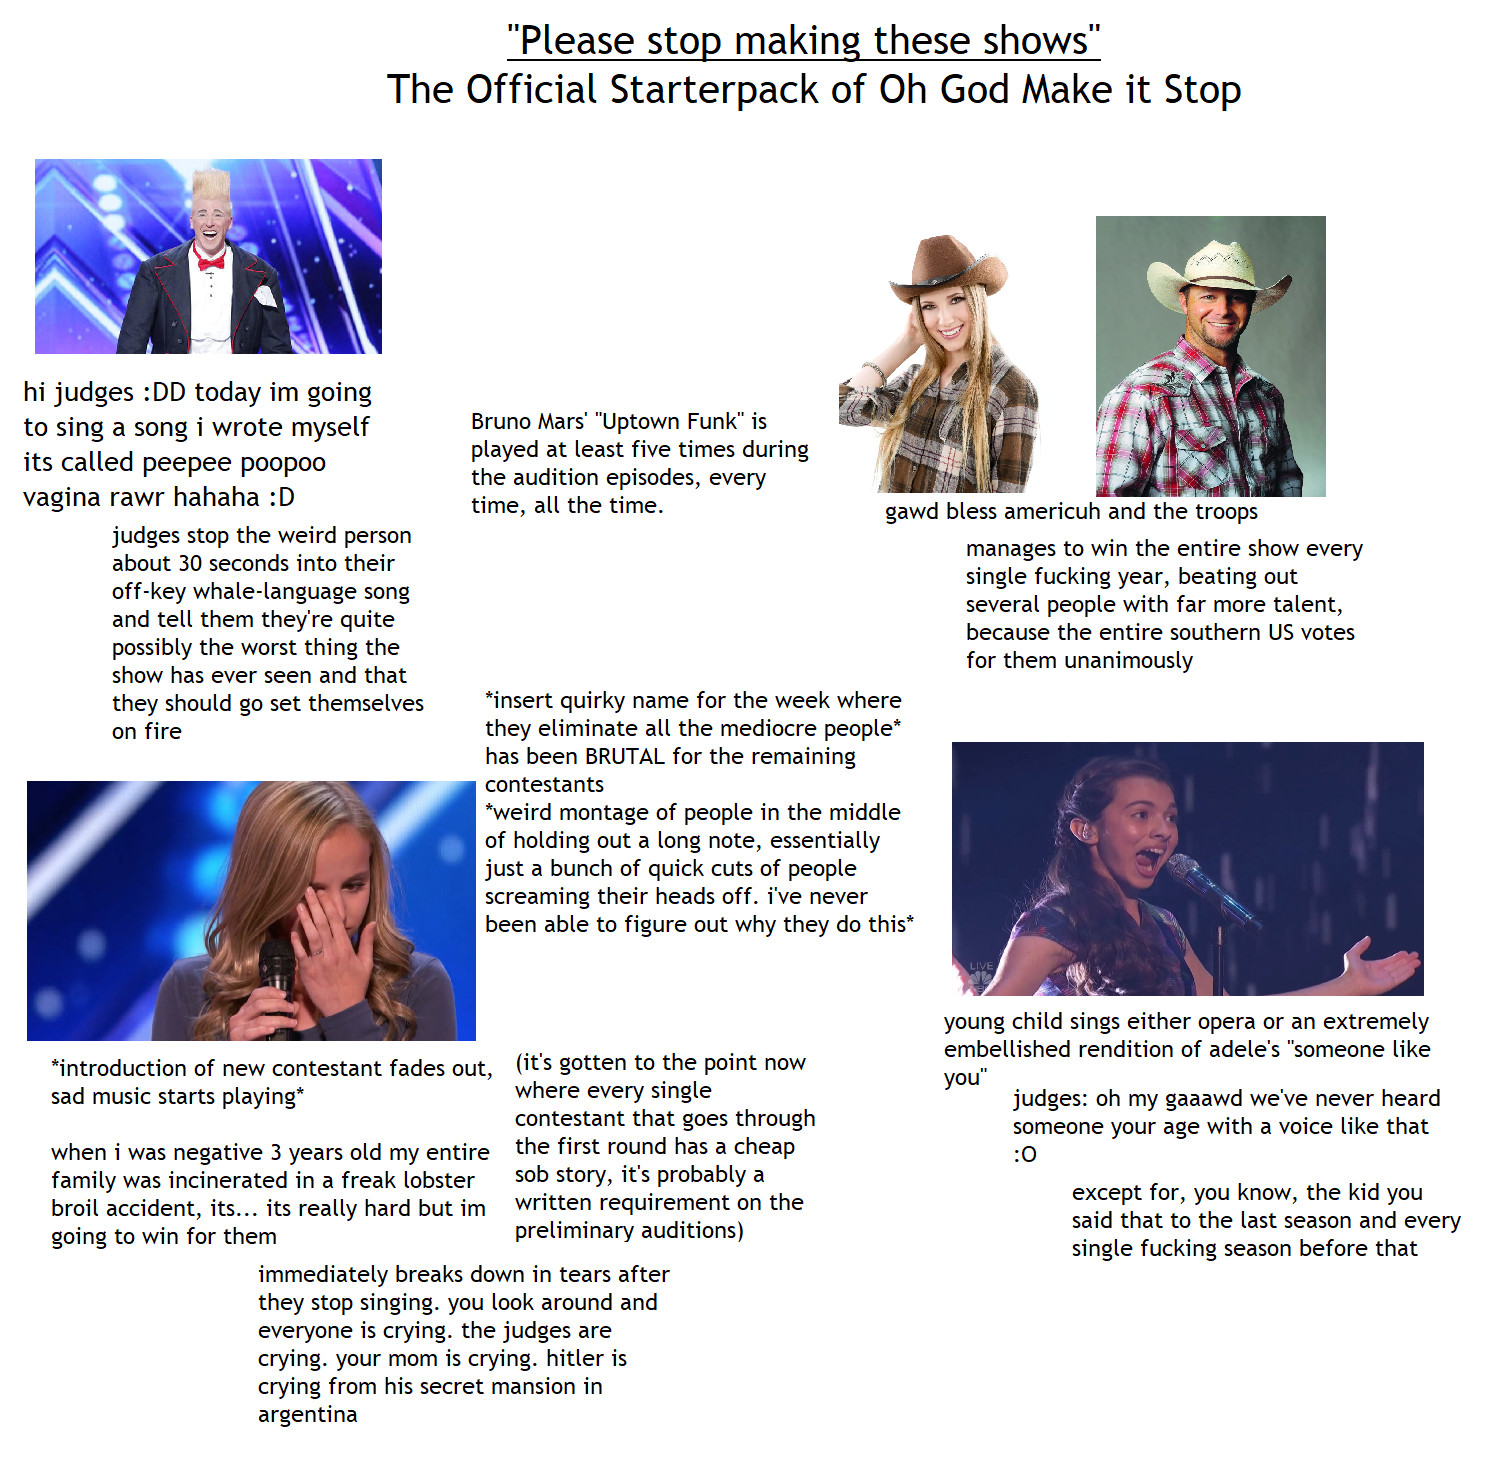 generic singing talent show starterpack